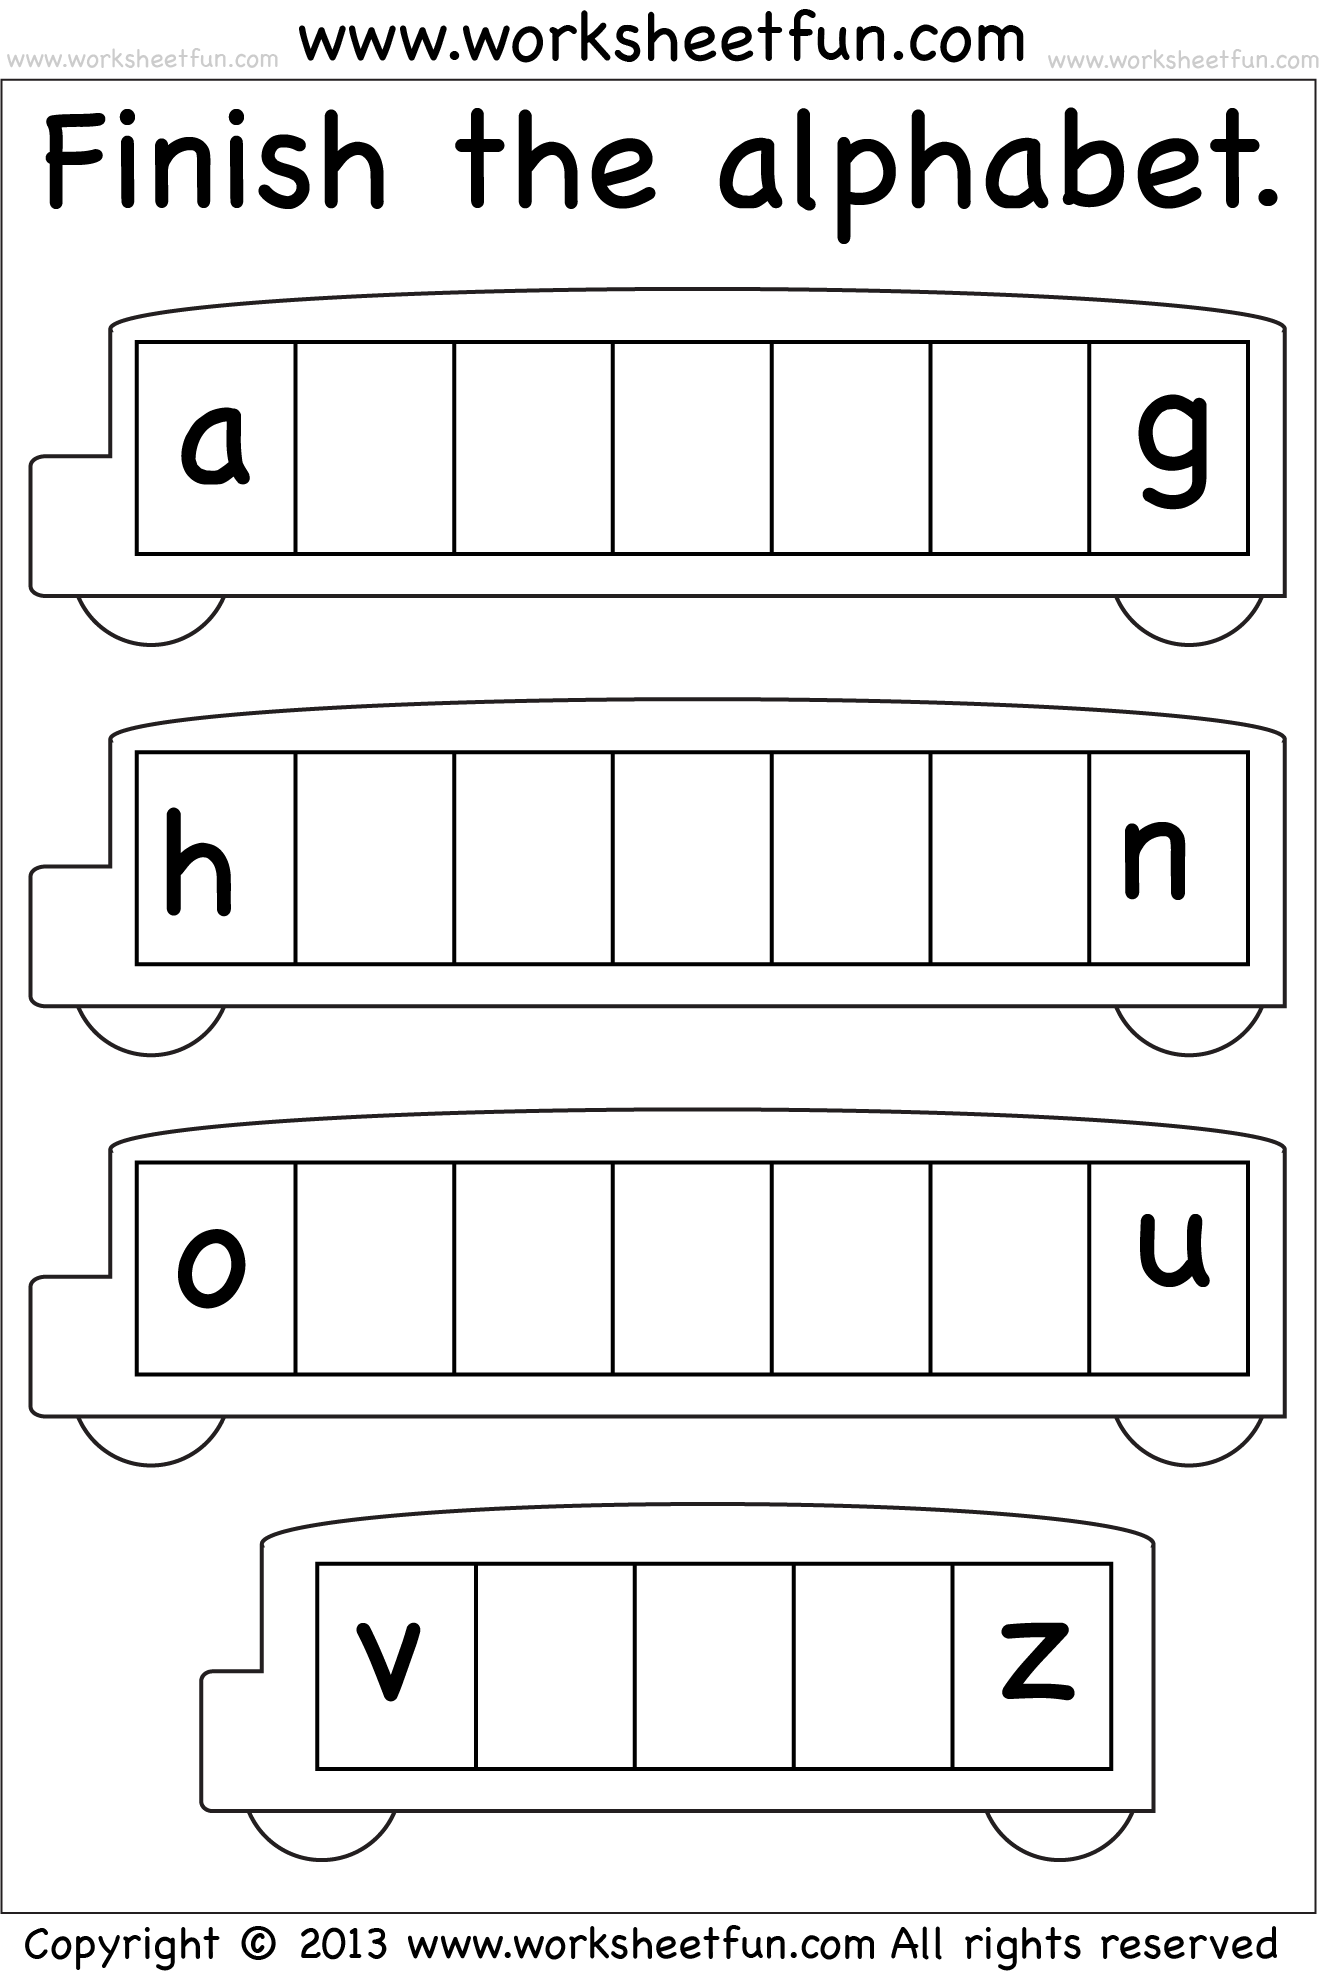 missing-lowercase-letters-missing-small-letters-worksheet-free